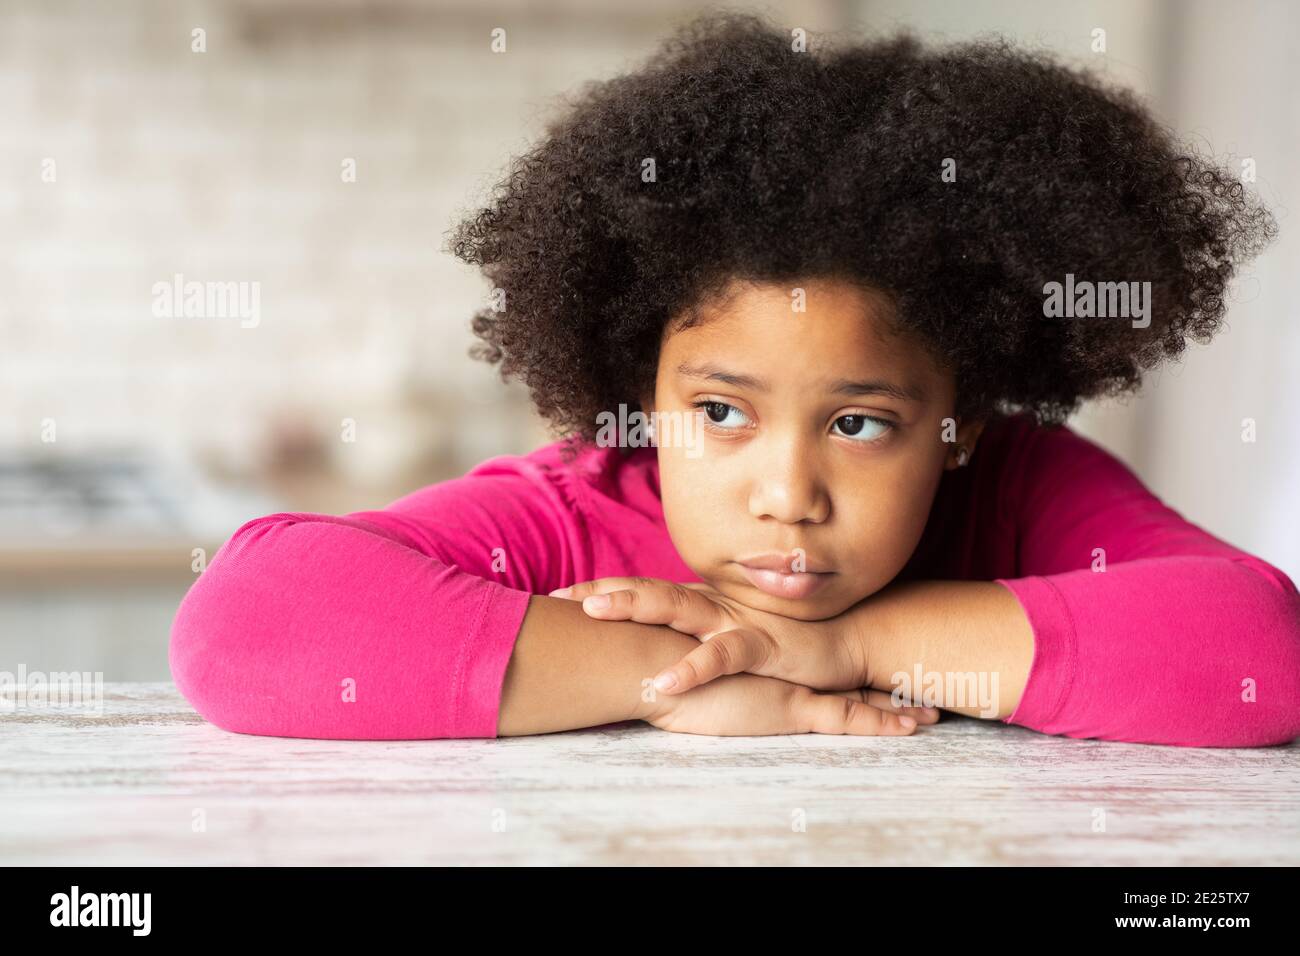 Portrait of cute sad little black girl sitting at table in kitchen. Stock Photo